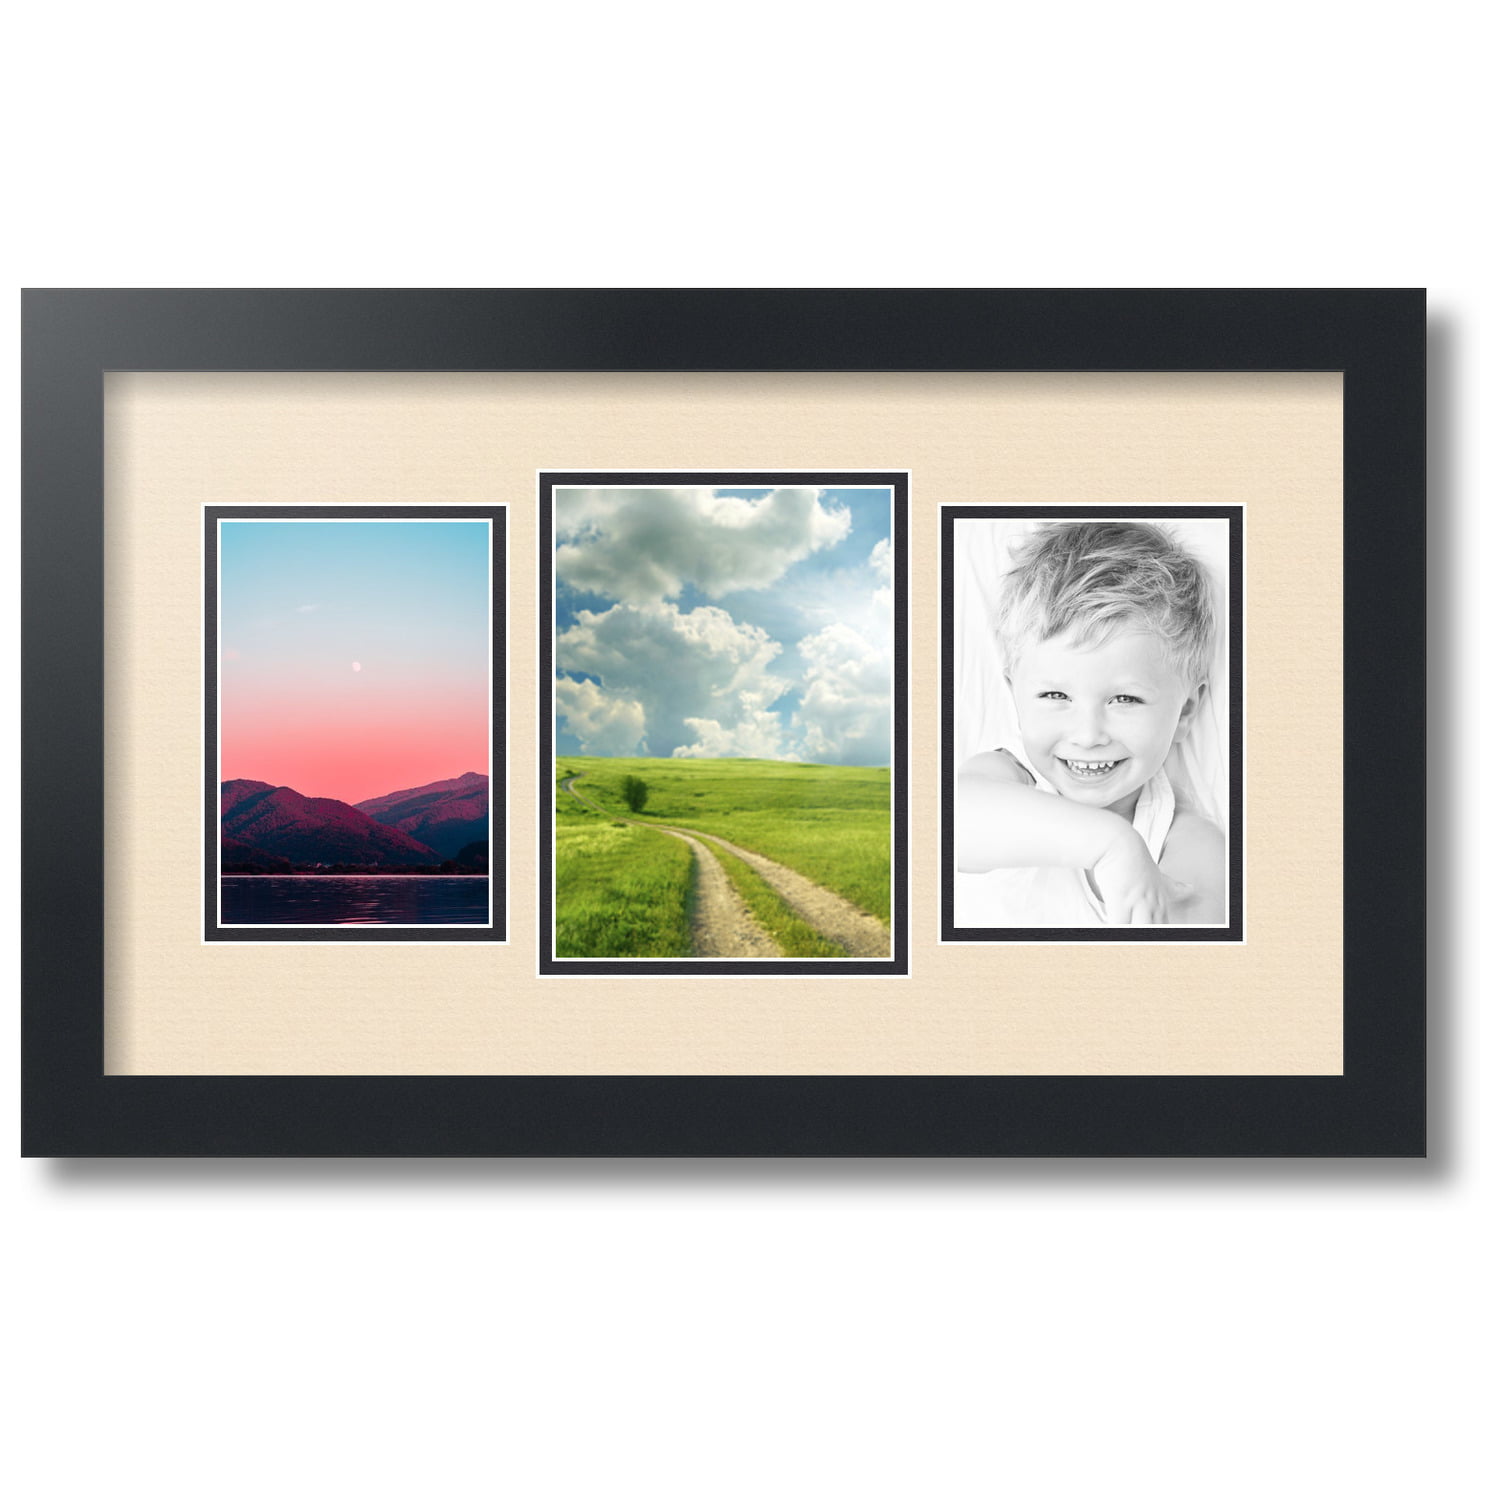 ArtToFrames Collage Mat Picture Photo Frame 2 4x6" Openings in Satin Black 34 